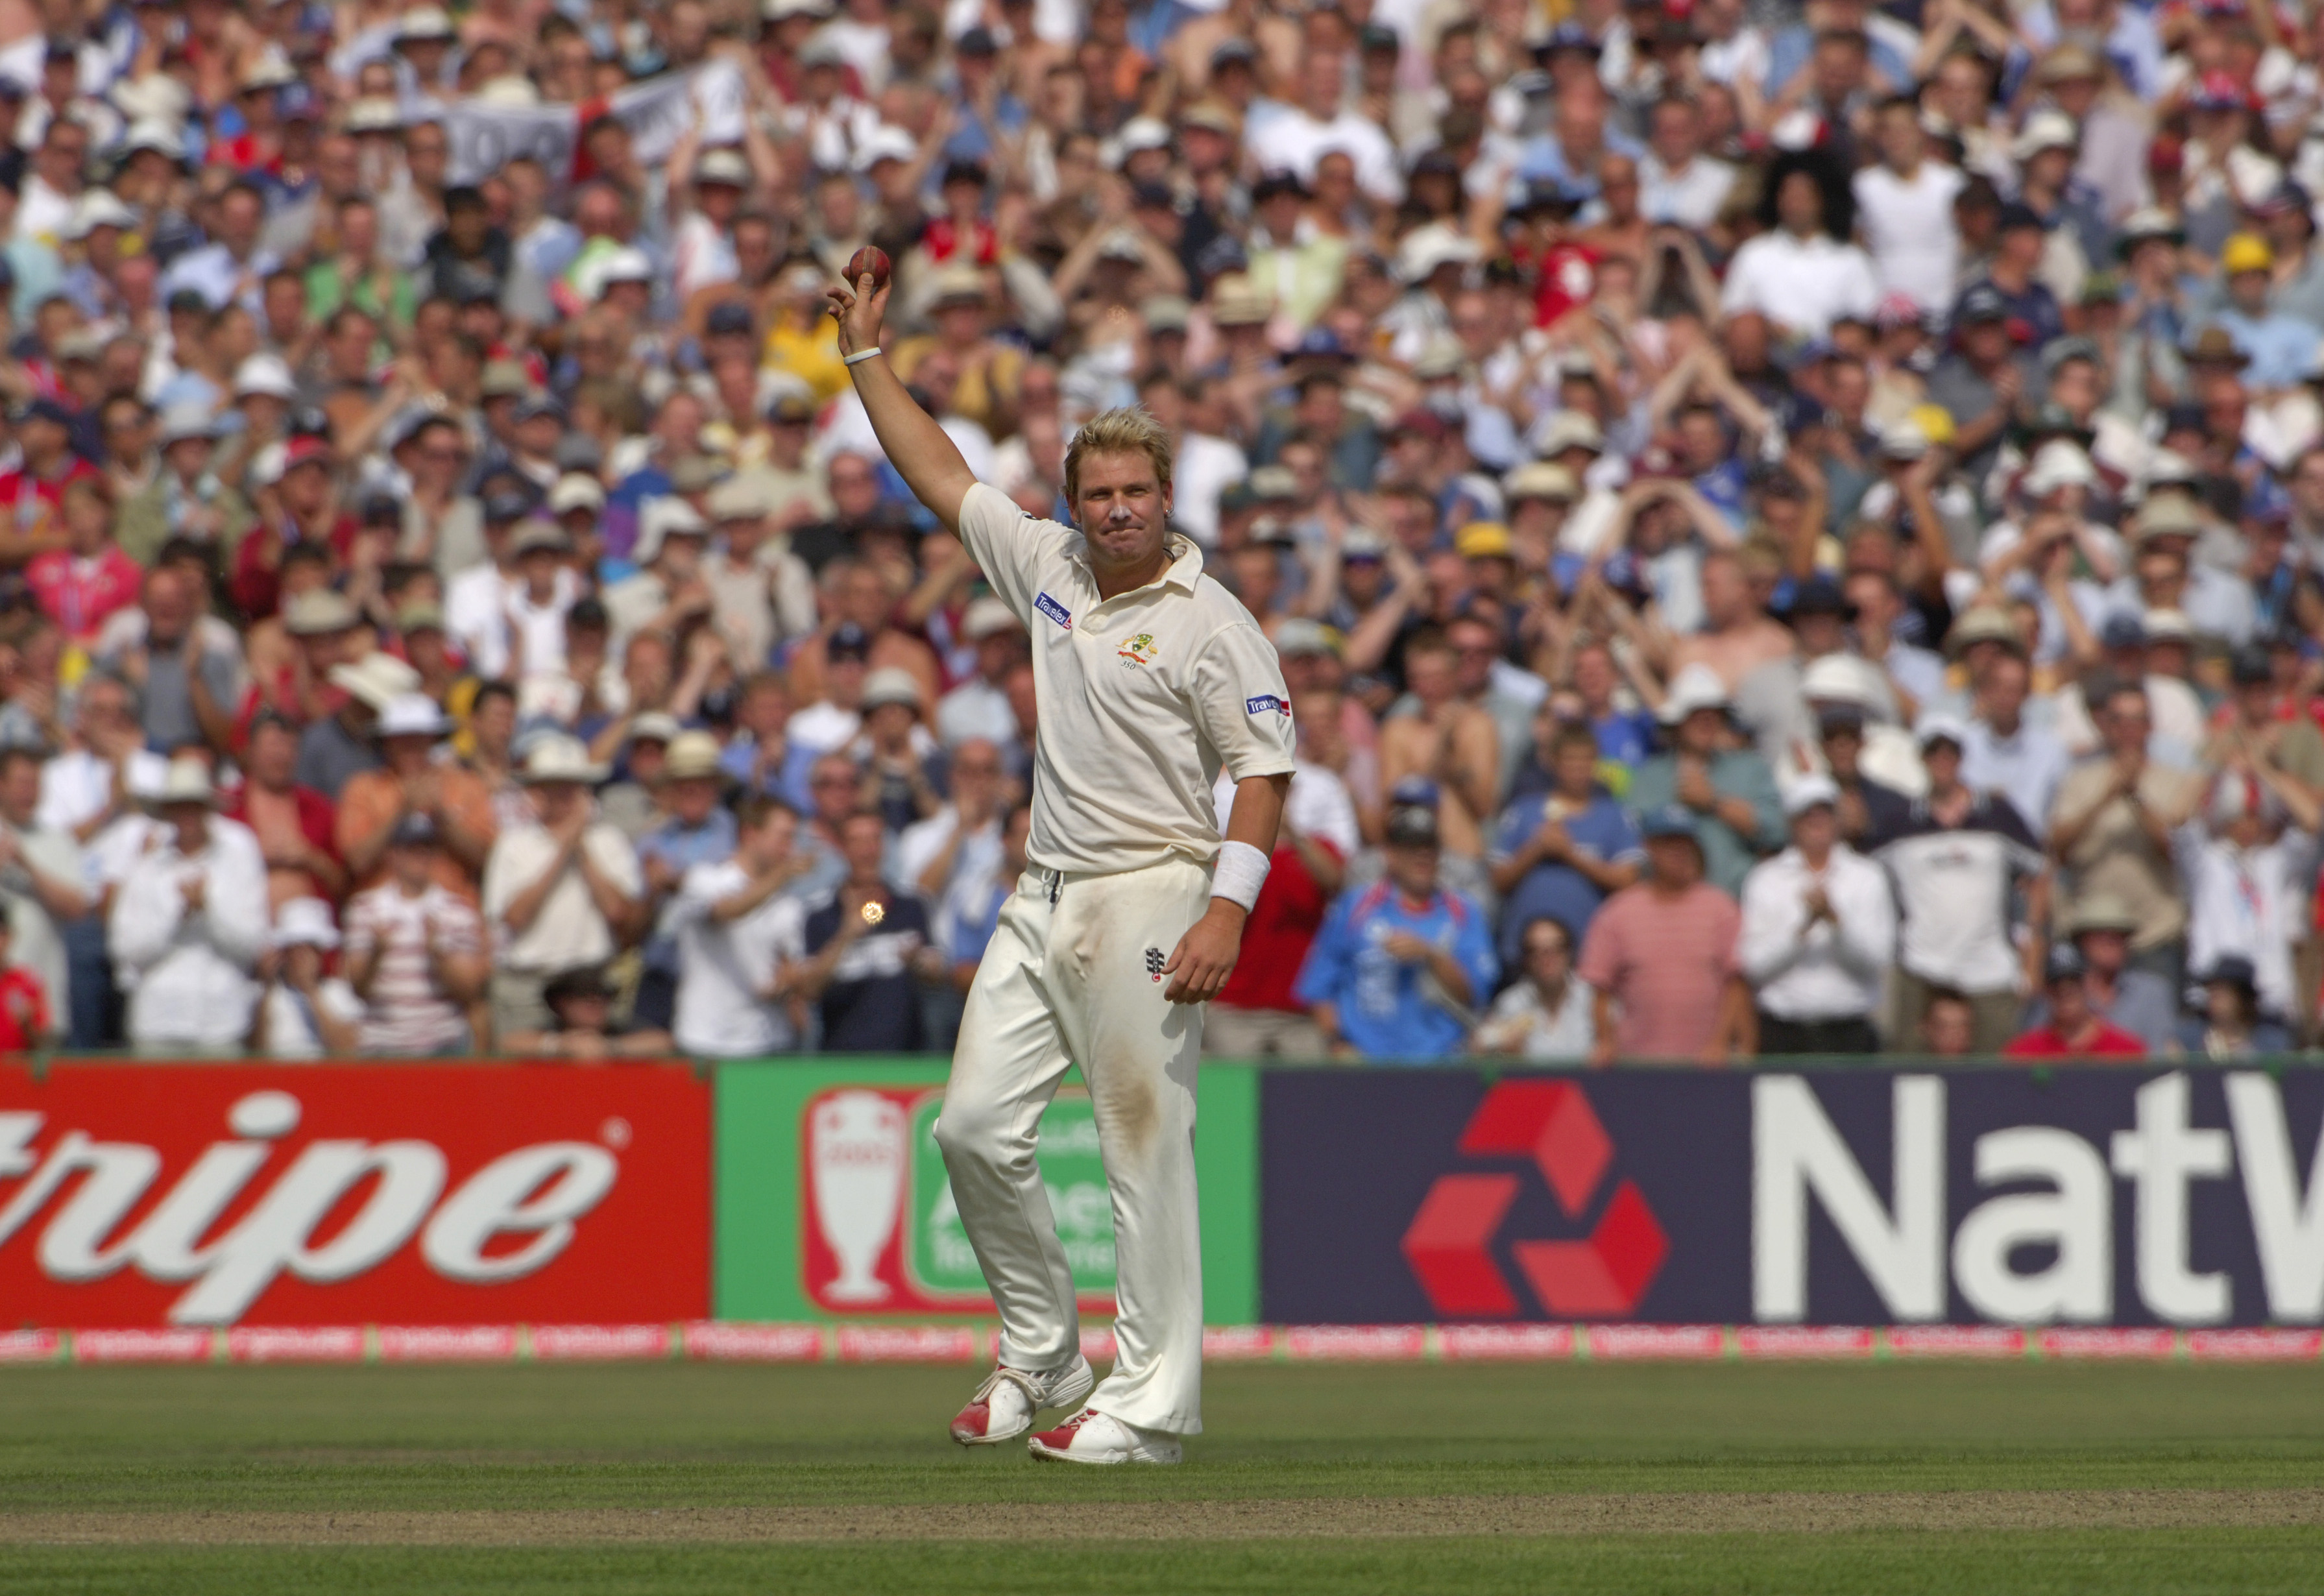 Shane Warne after taking his 600th Test wicket at the 3rd Test England v Australia at Old Trafford 2005.